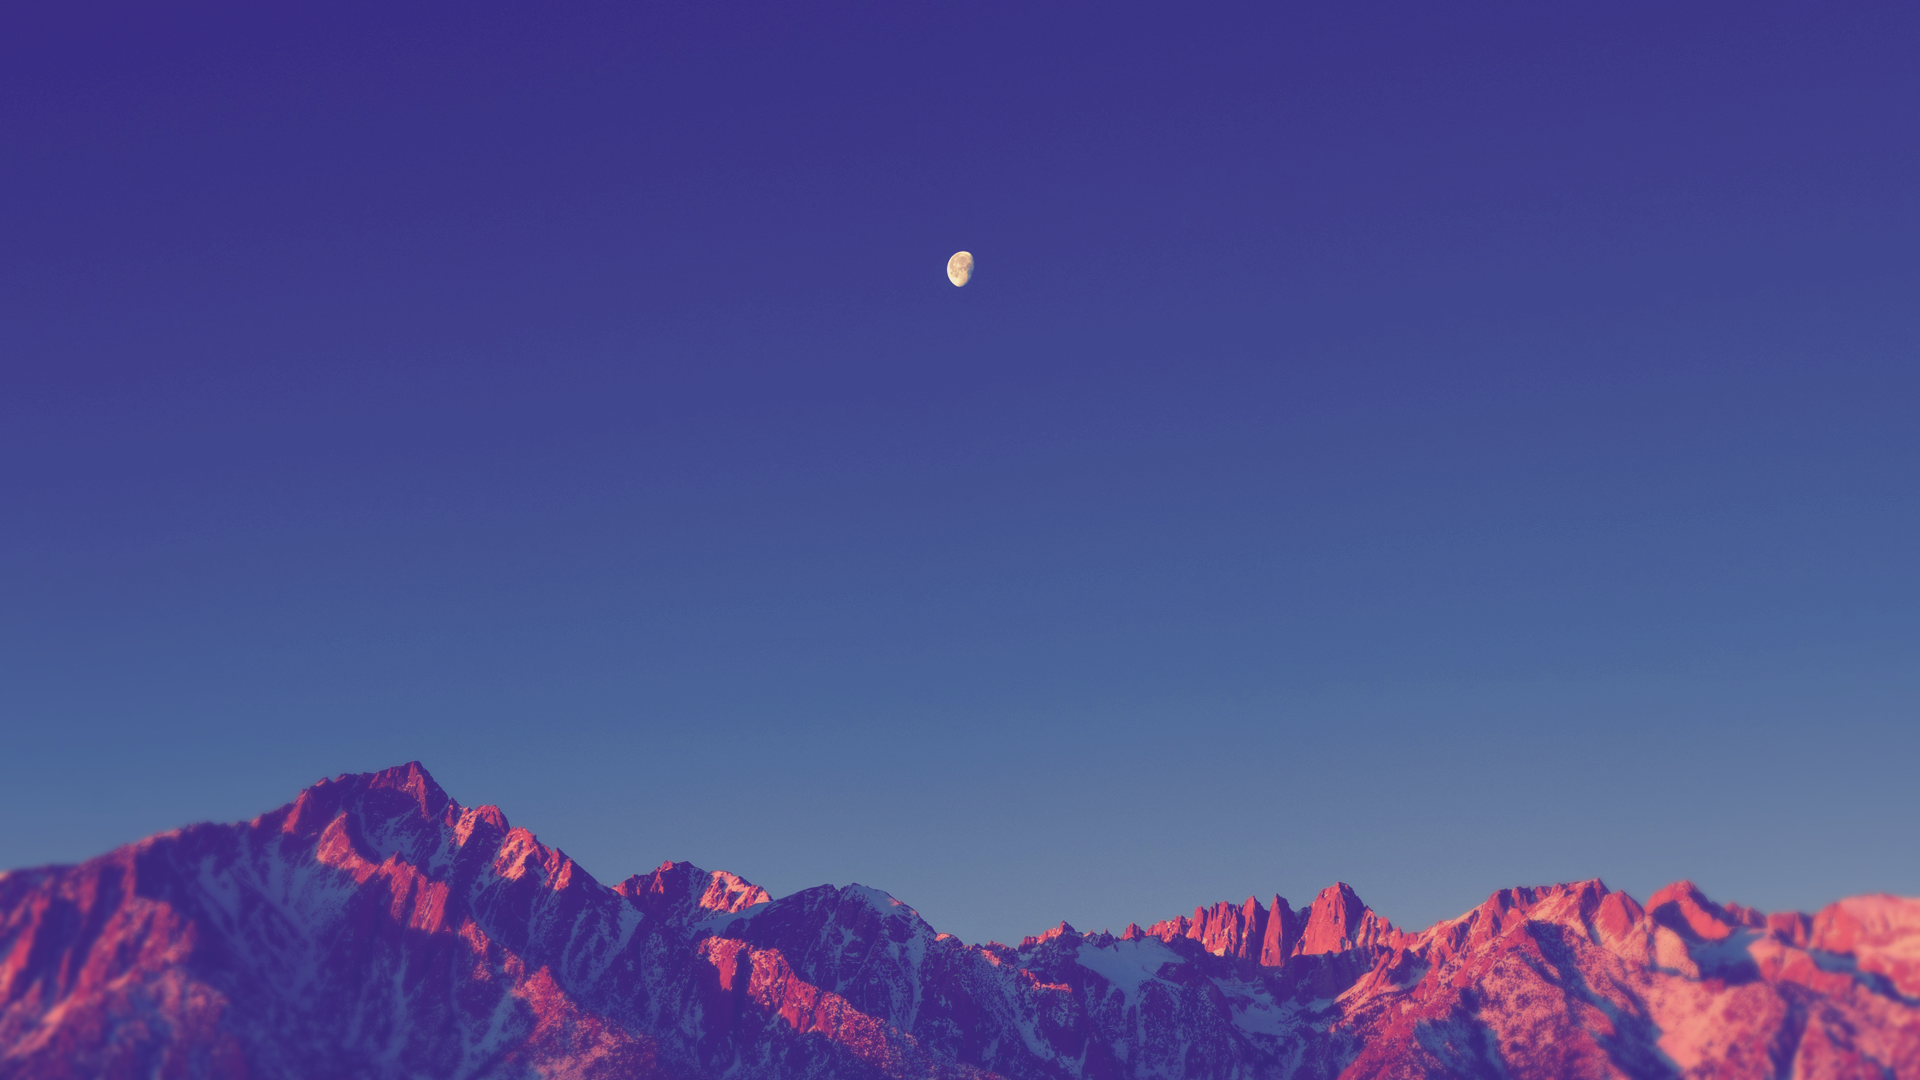 Landscape, #simple, #nature, #Moon, #shadow, #mountains, #snowy